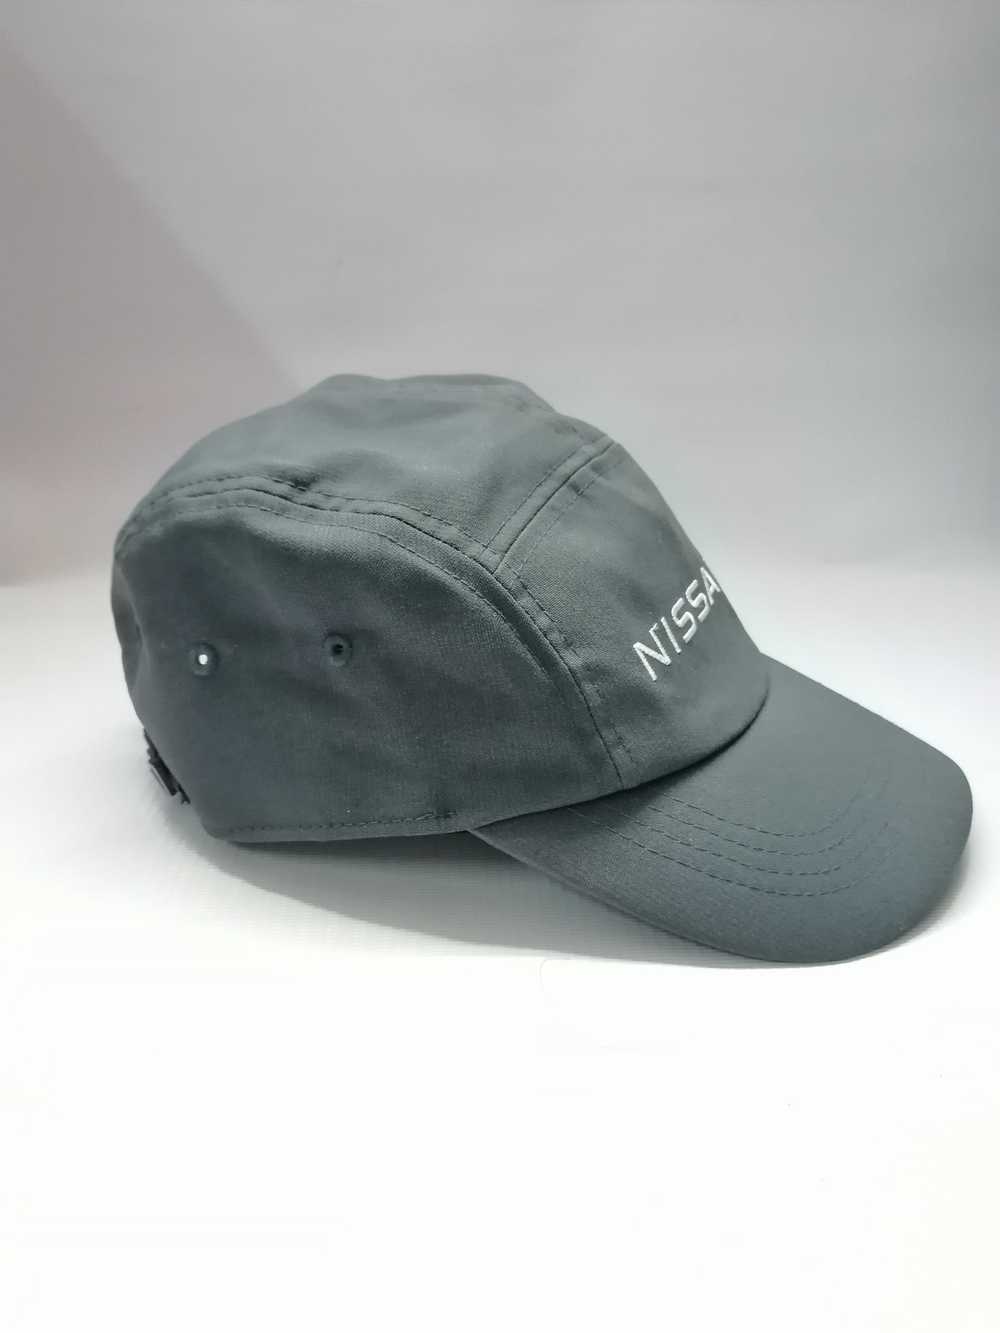 Gear For Sports × Racing × Retro Hat 5 PANEL NISS… - image 2